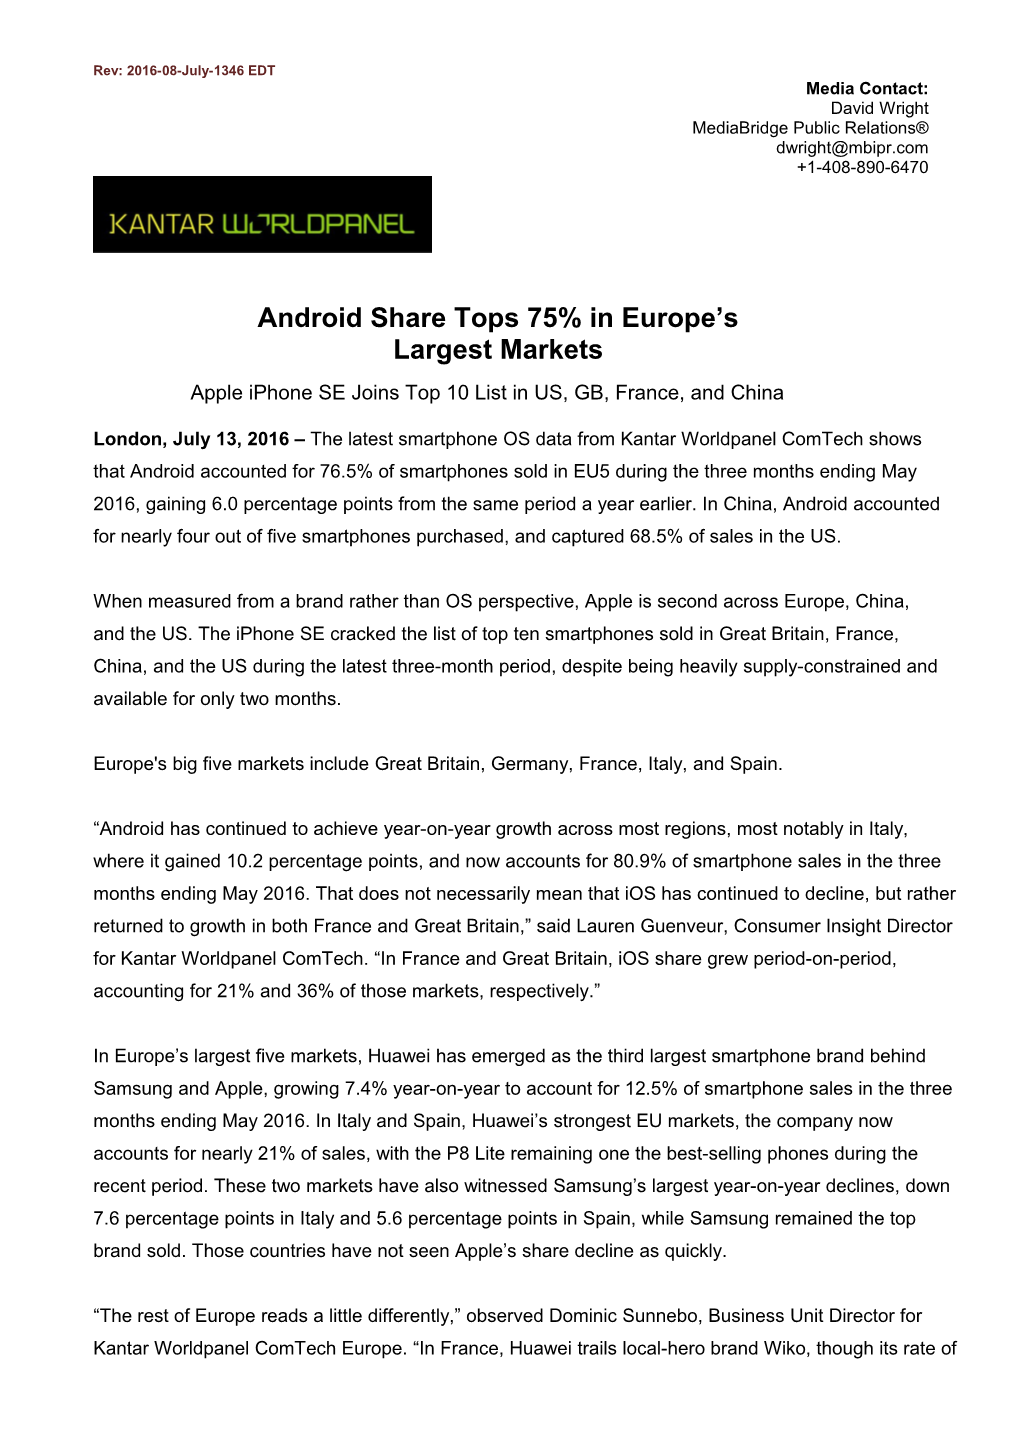 Android Share Tops 75% in Europe S Largest Markets